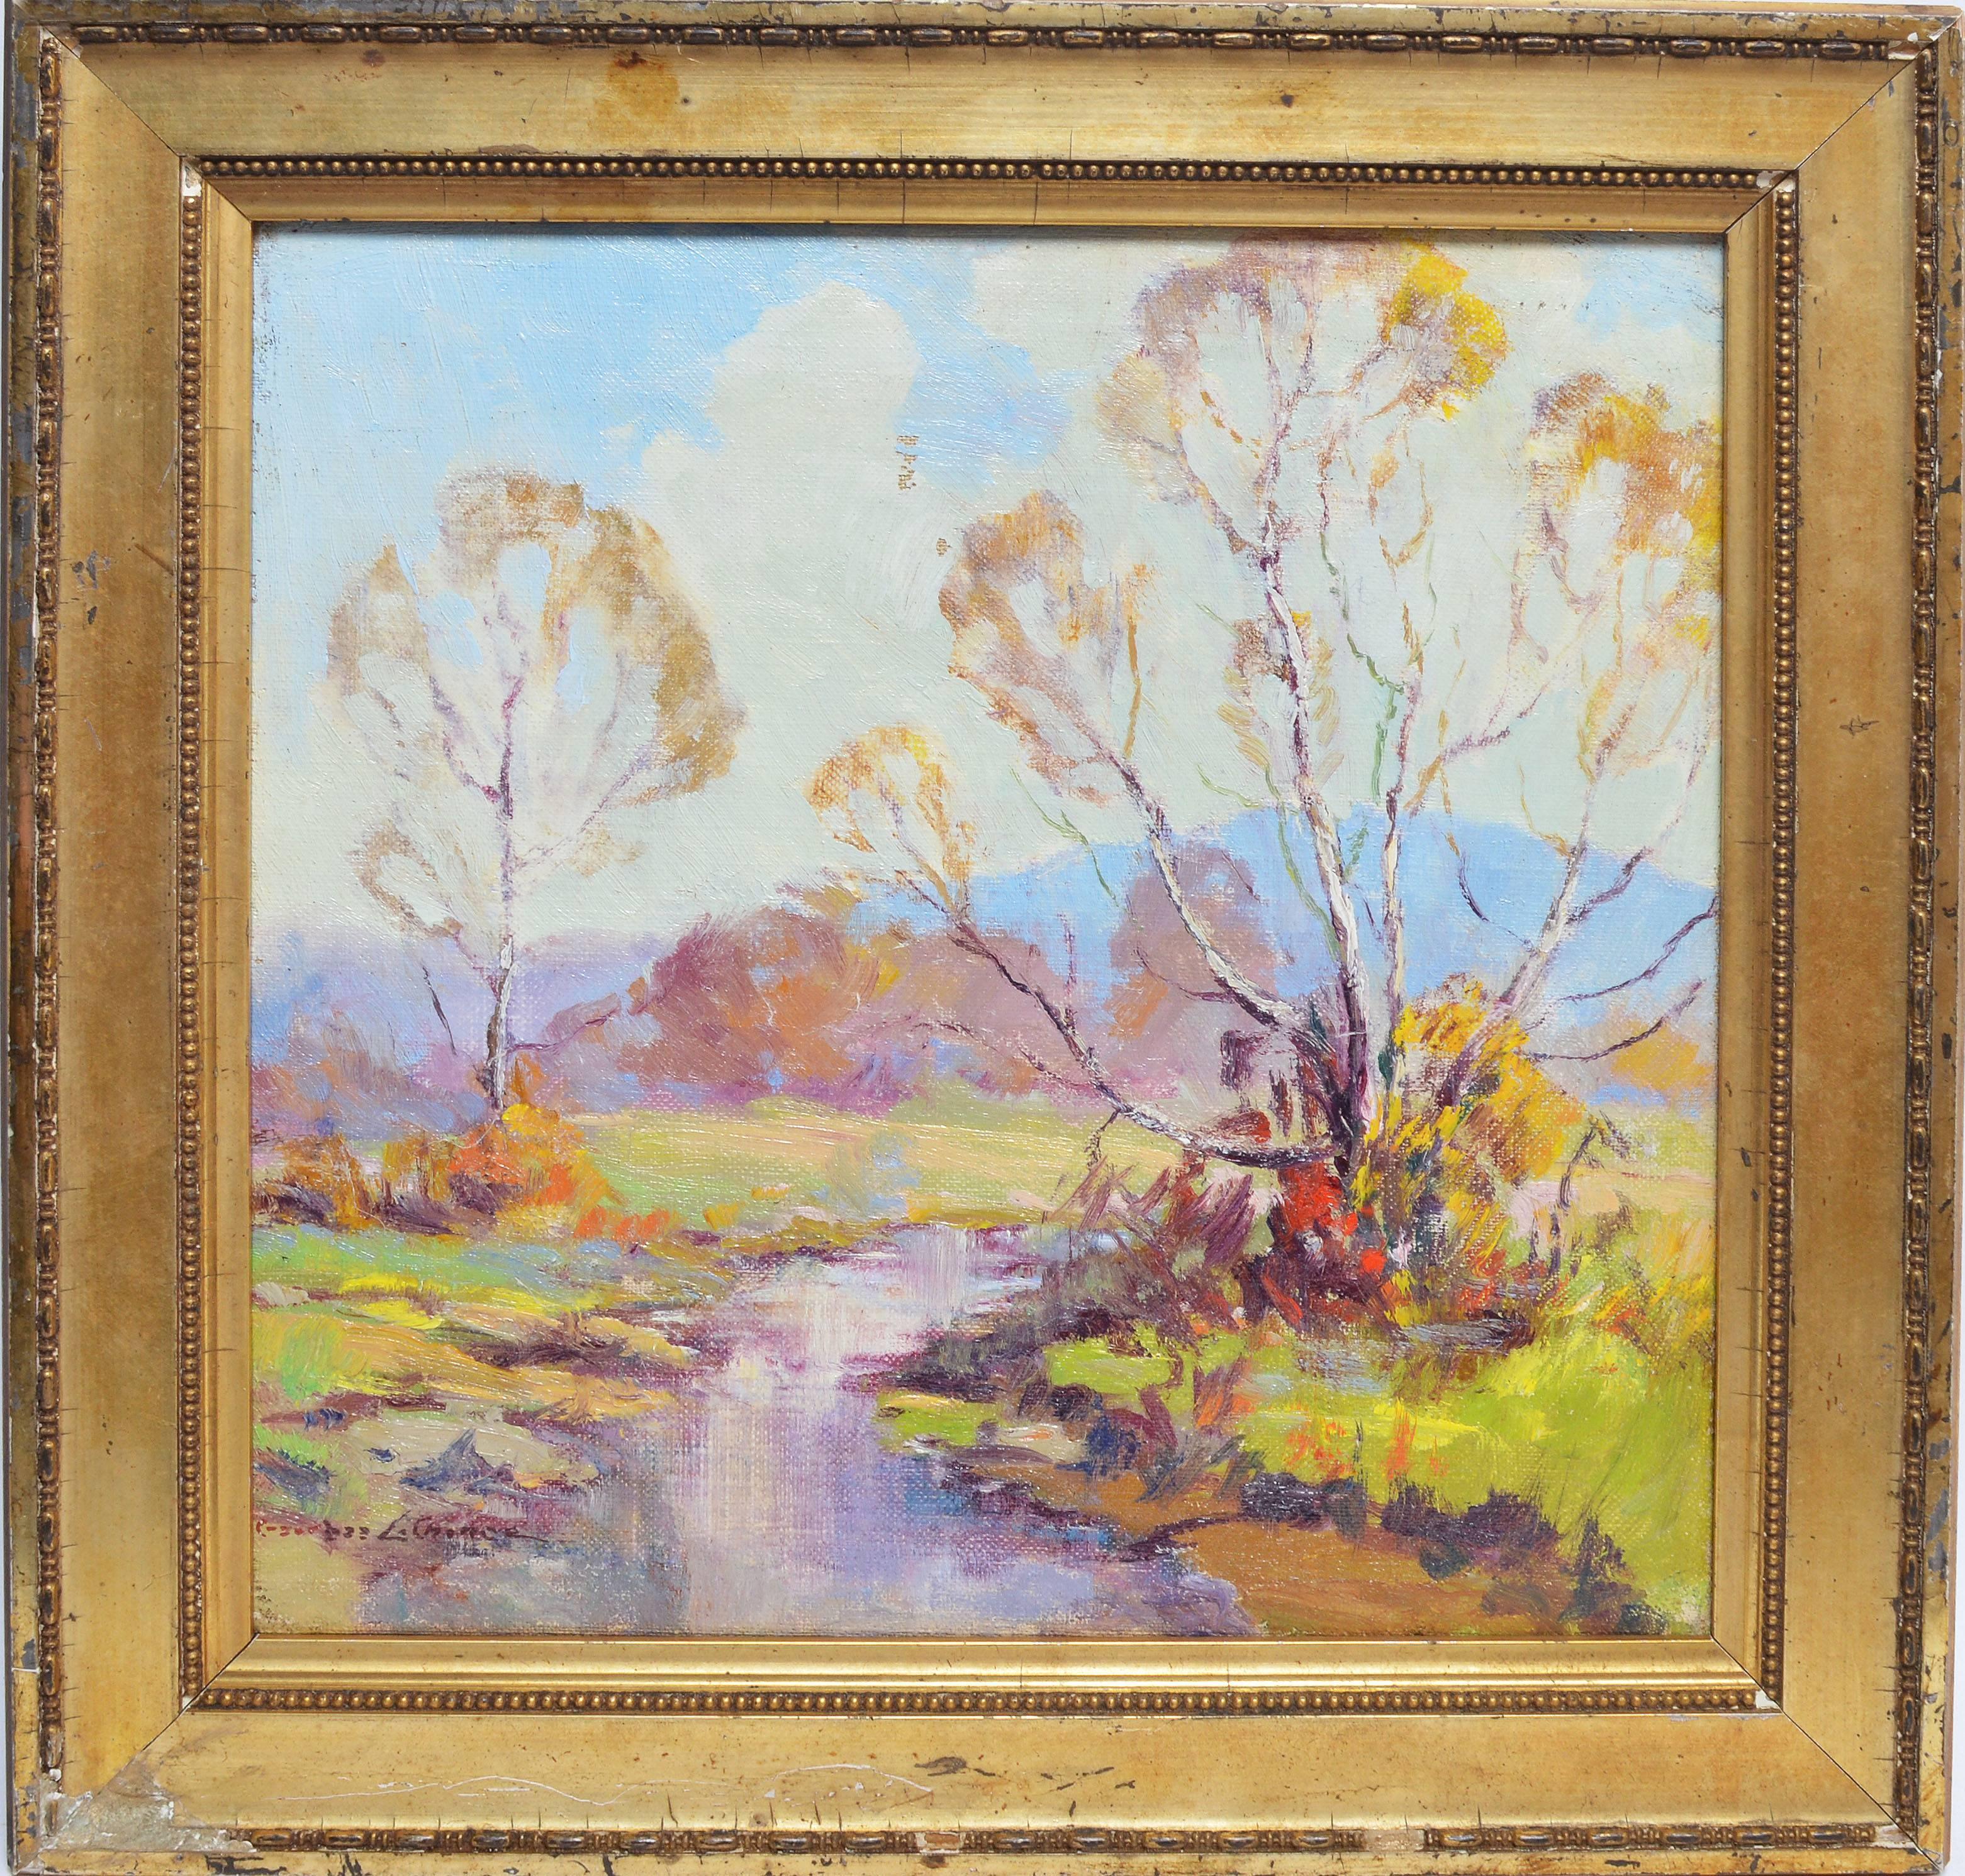 Impressionist view of a sunlit landscape by Georges La Chance  (1888 - 1964) . Oil on canvas, circa 1920. Signed lower left. Displayed in a giltwood frame. Image size, 10"L x 10"H, overall 13"L x 13"H.
